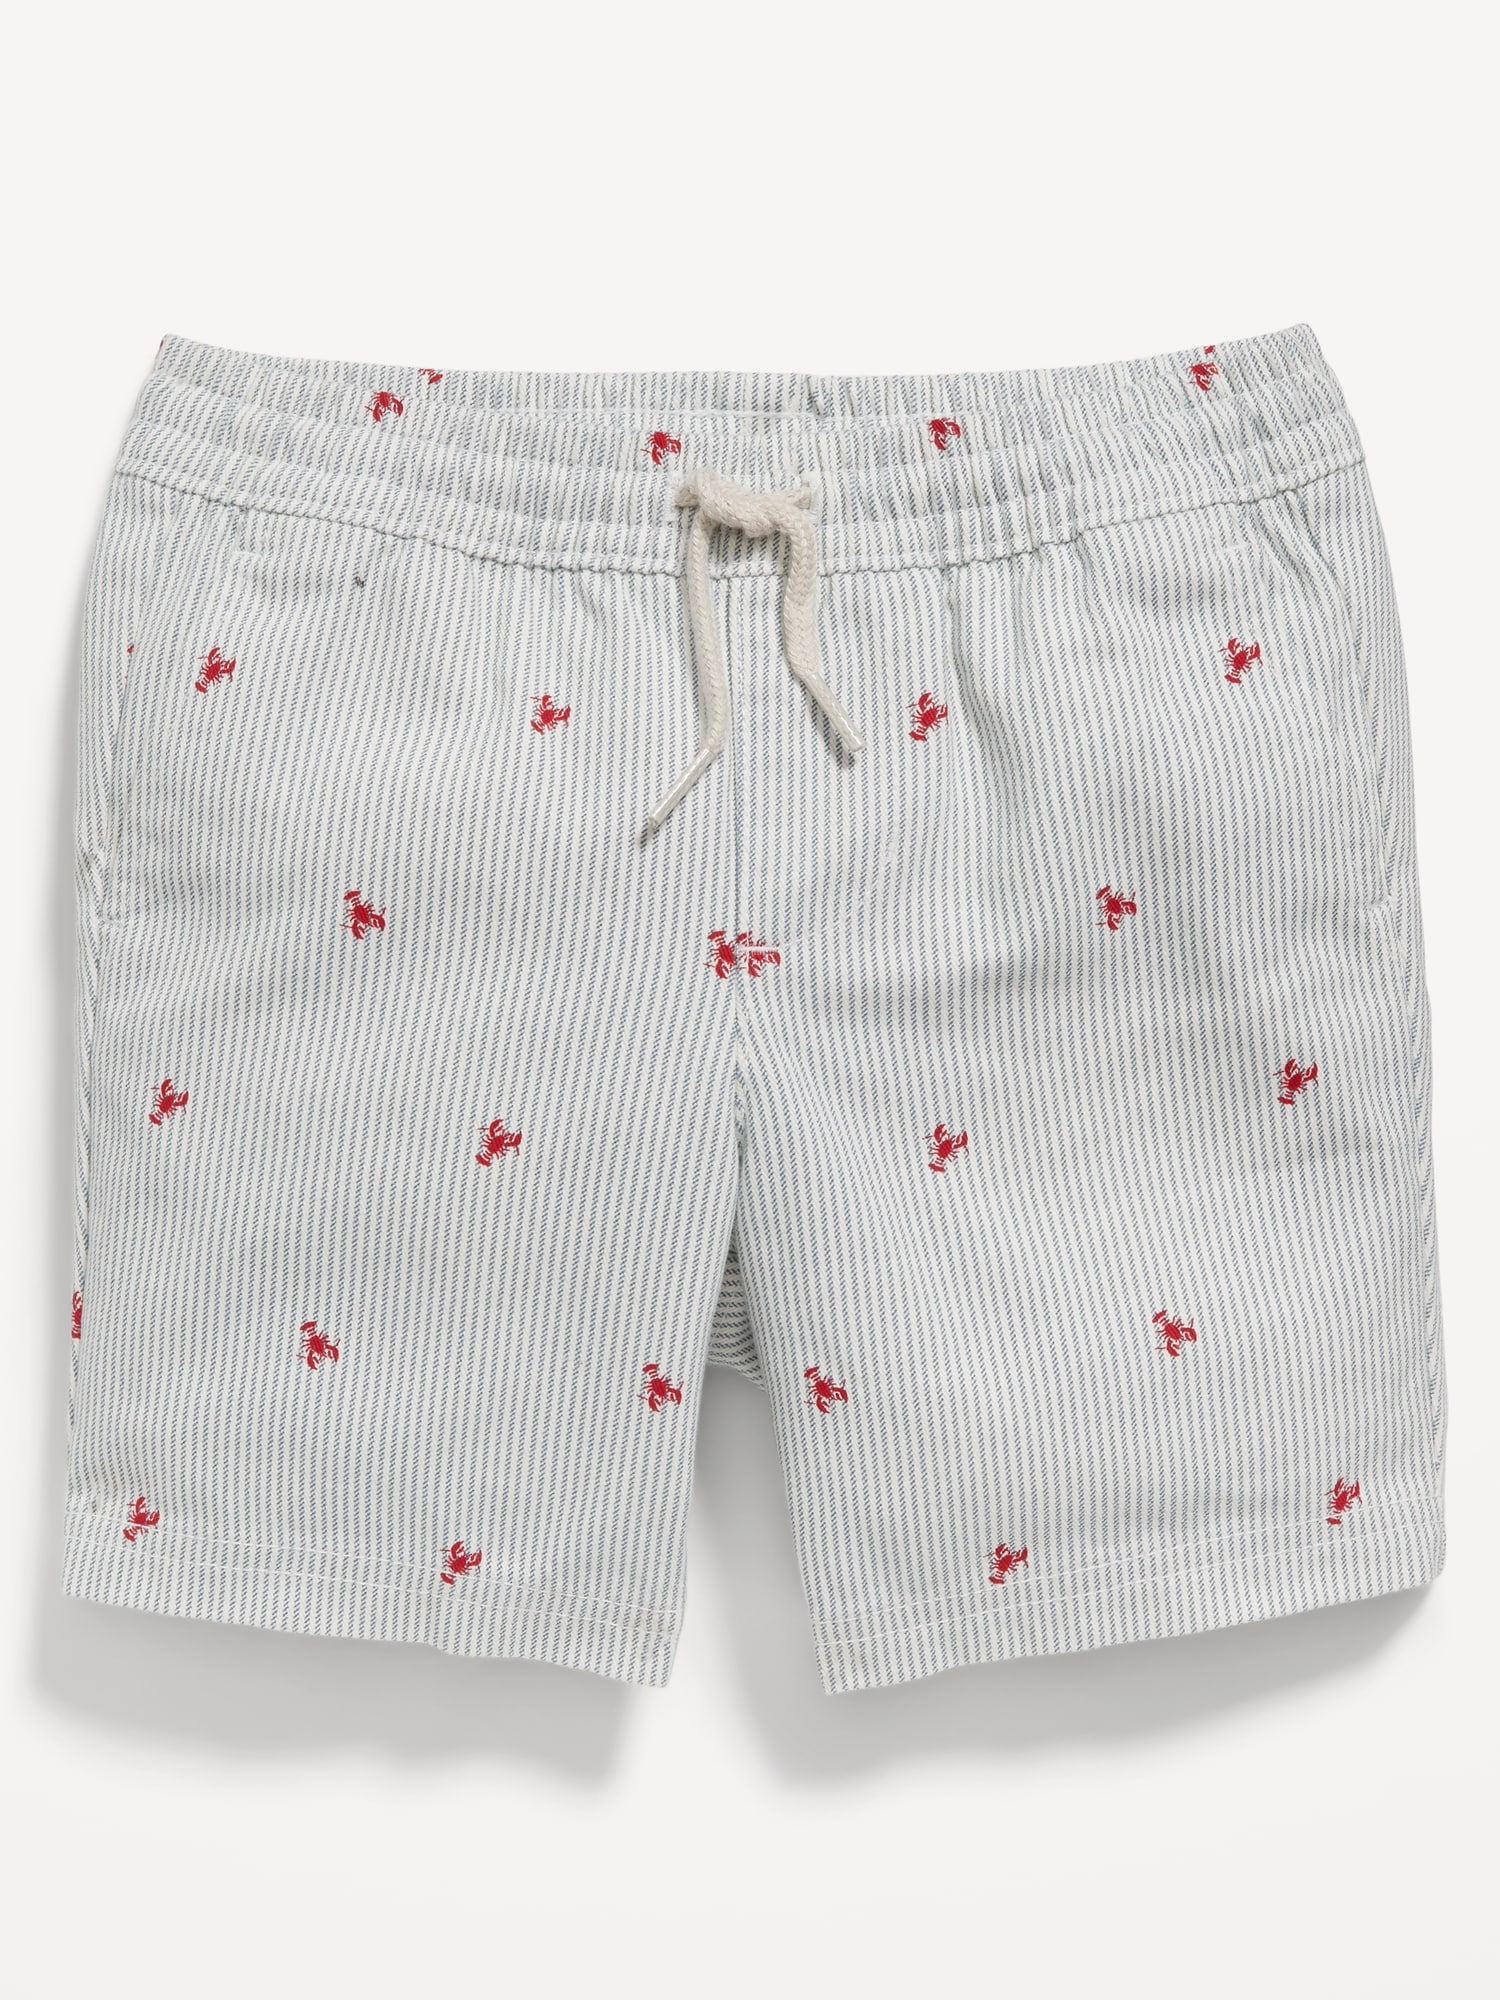 Old Navy Printed Functional-Drawstring Twill Shorts for Toddler Boys red. 1